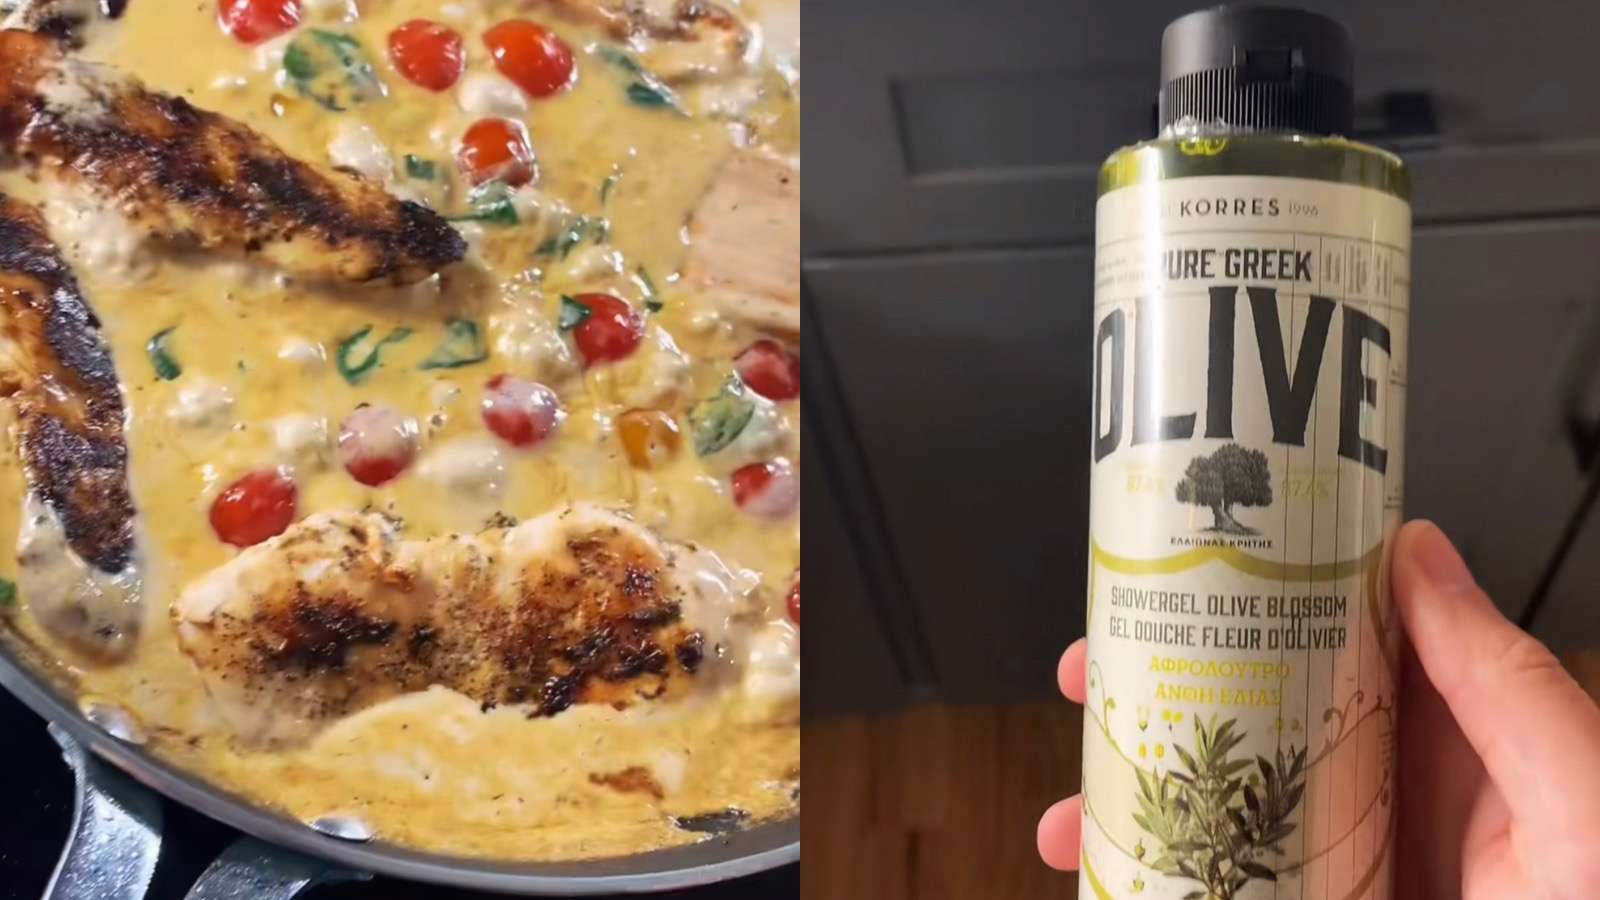 woman uses shower gel instead of olive oil while cooking